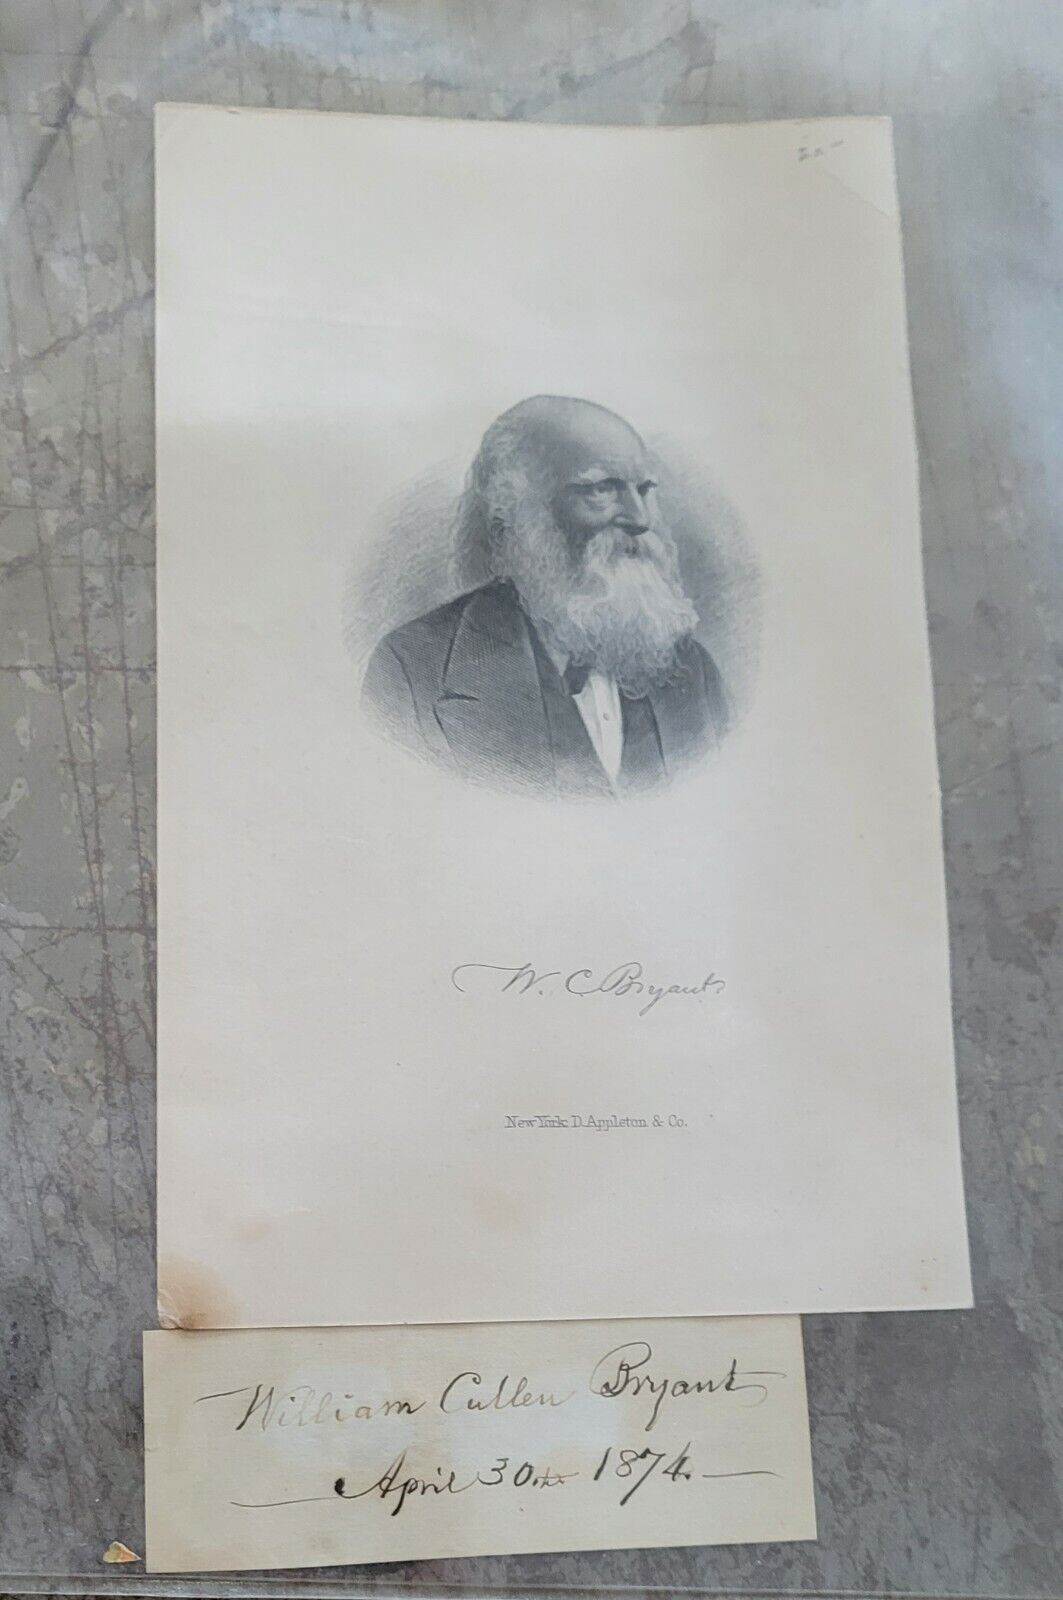 William Cullen Bryant Autograph card 4-30 1874 plus engraving of his likeness